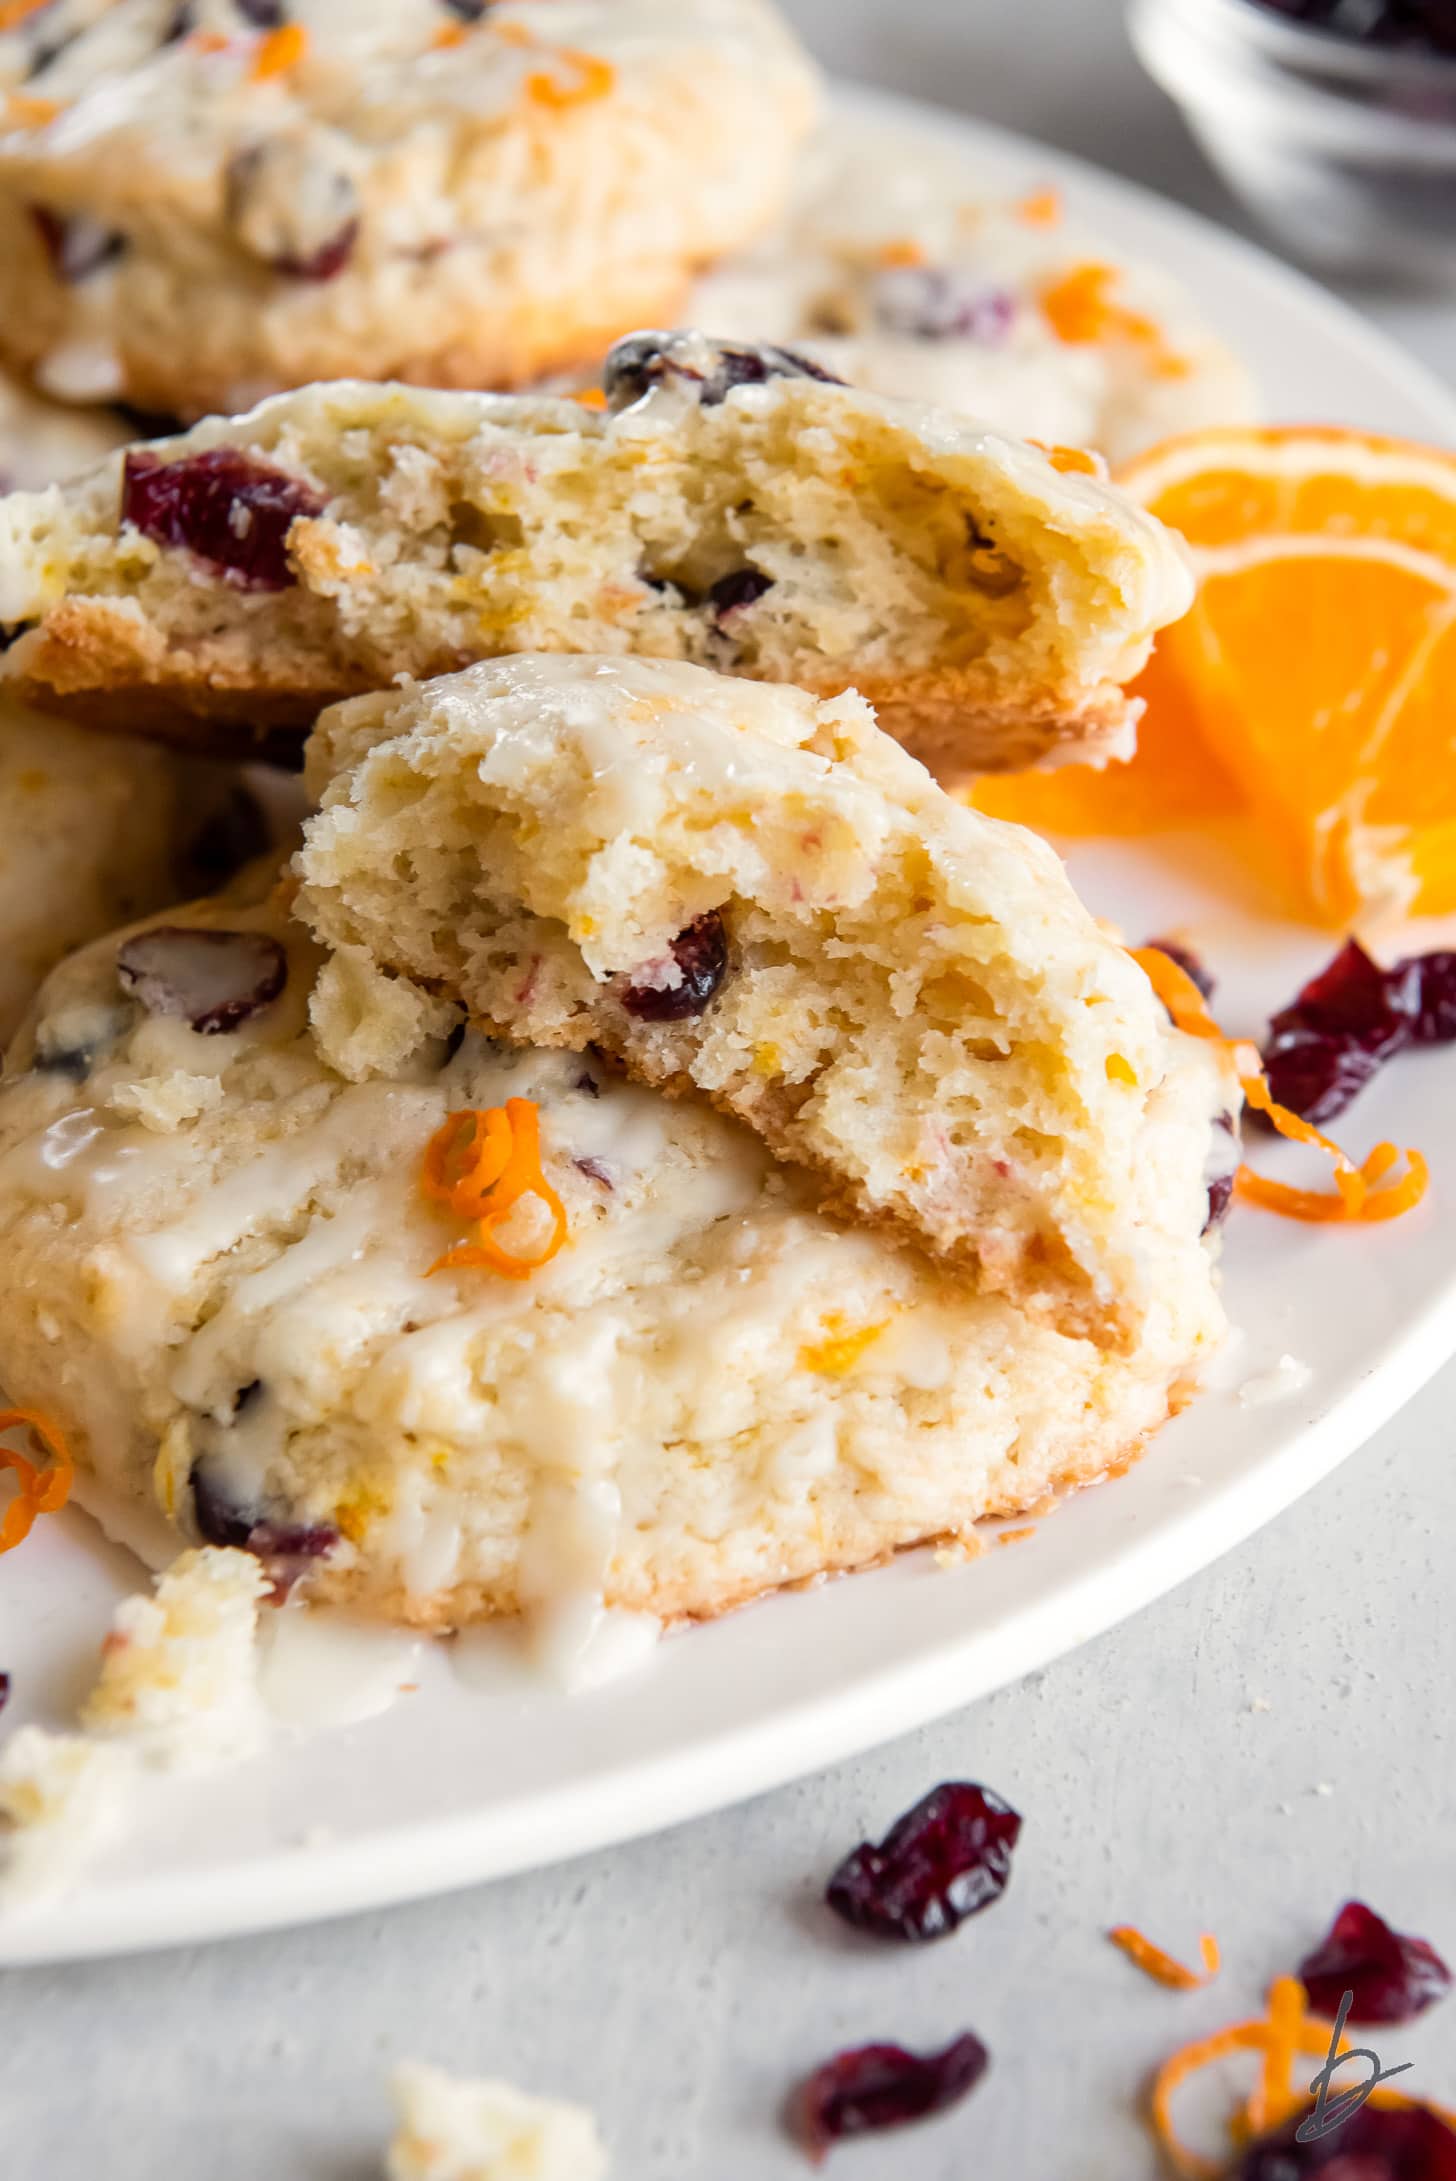 two halves of a cranberry orange scone on top of more scones on a plate.